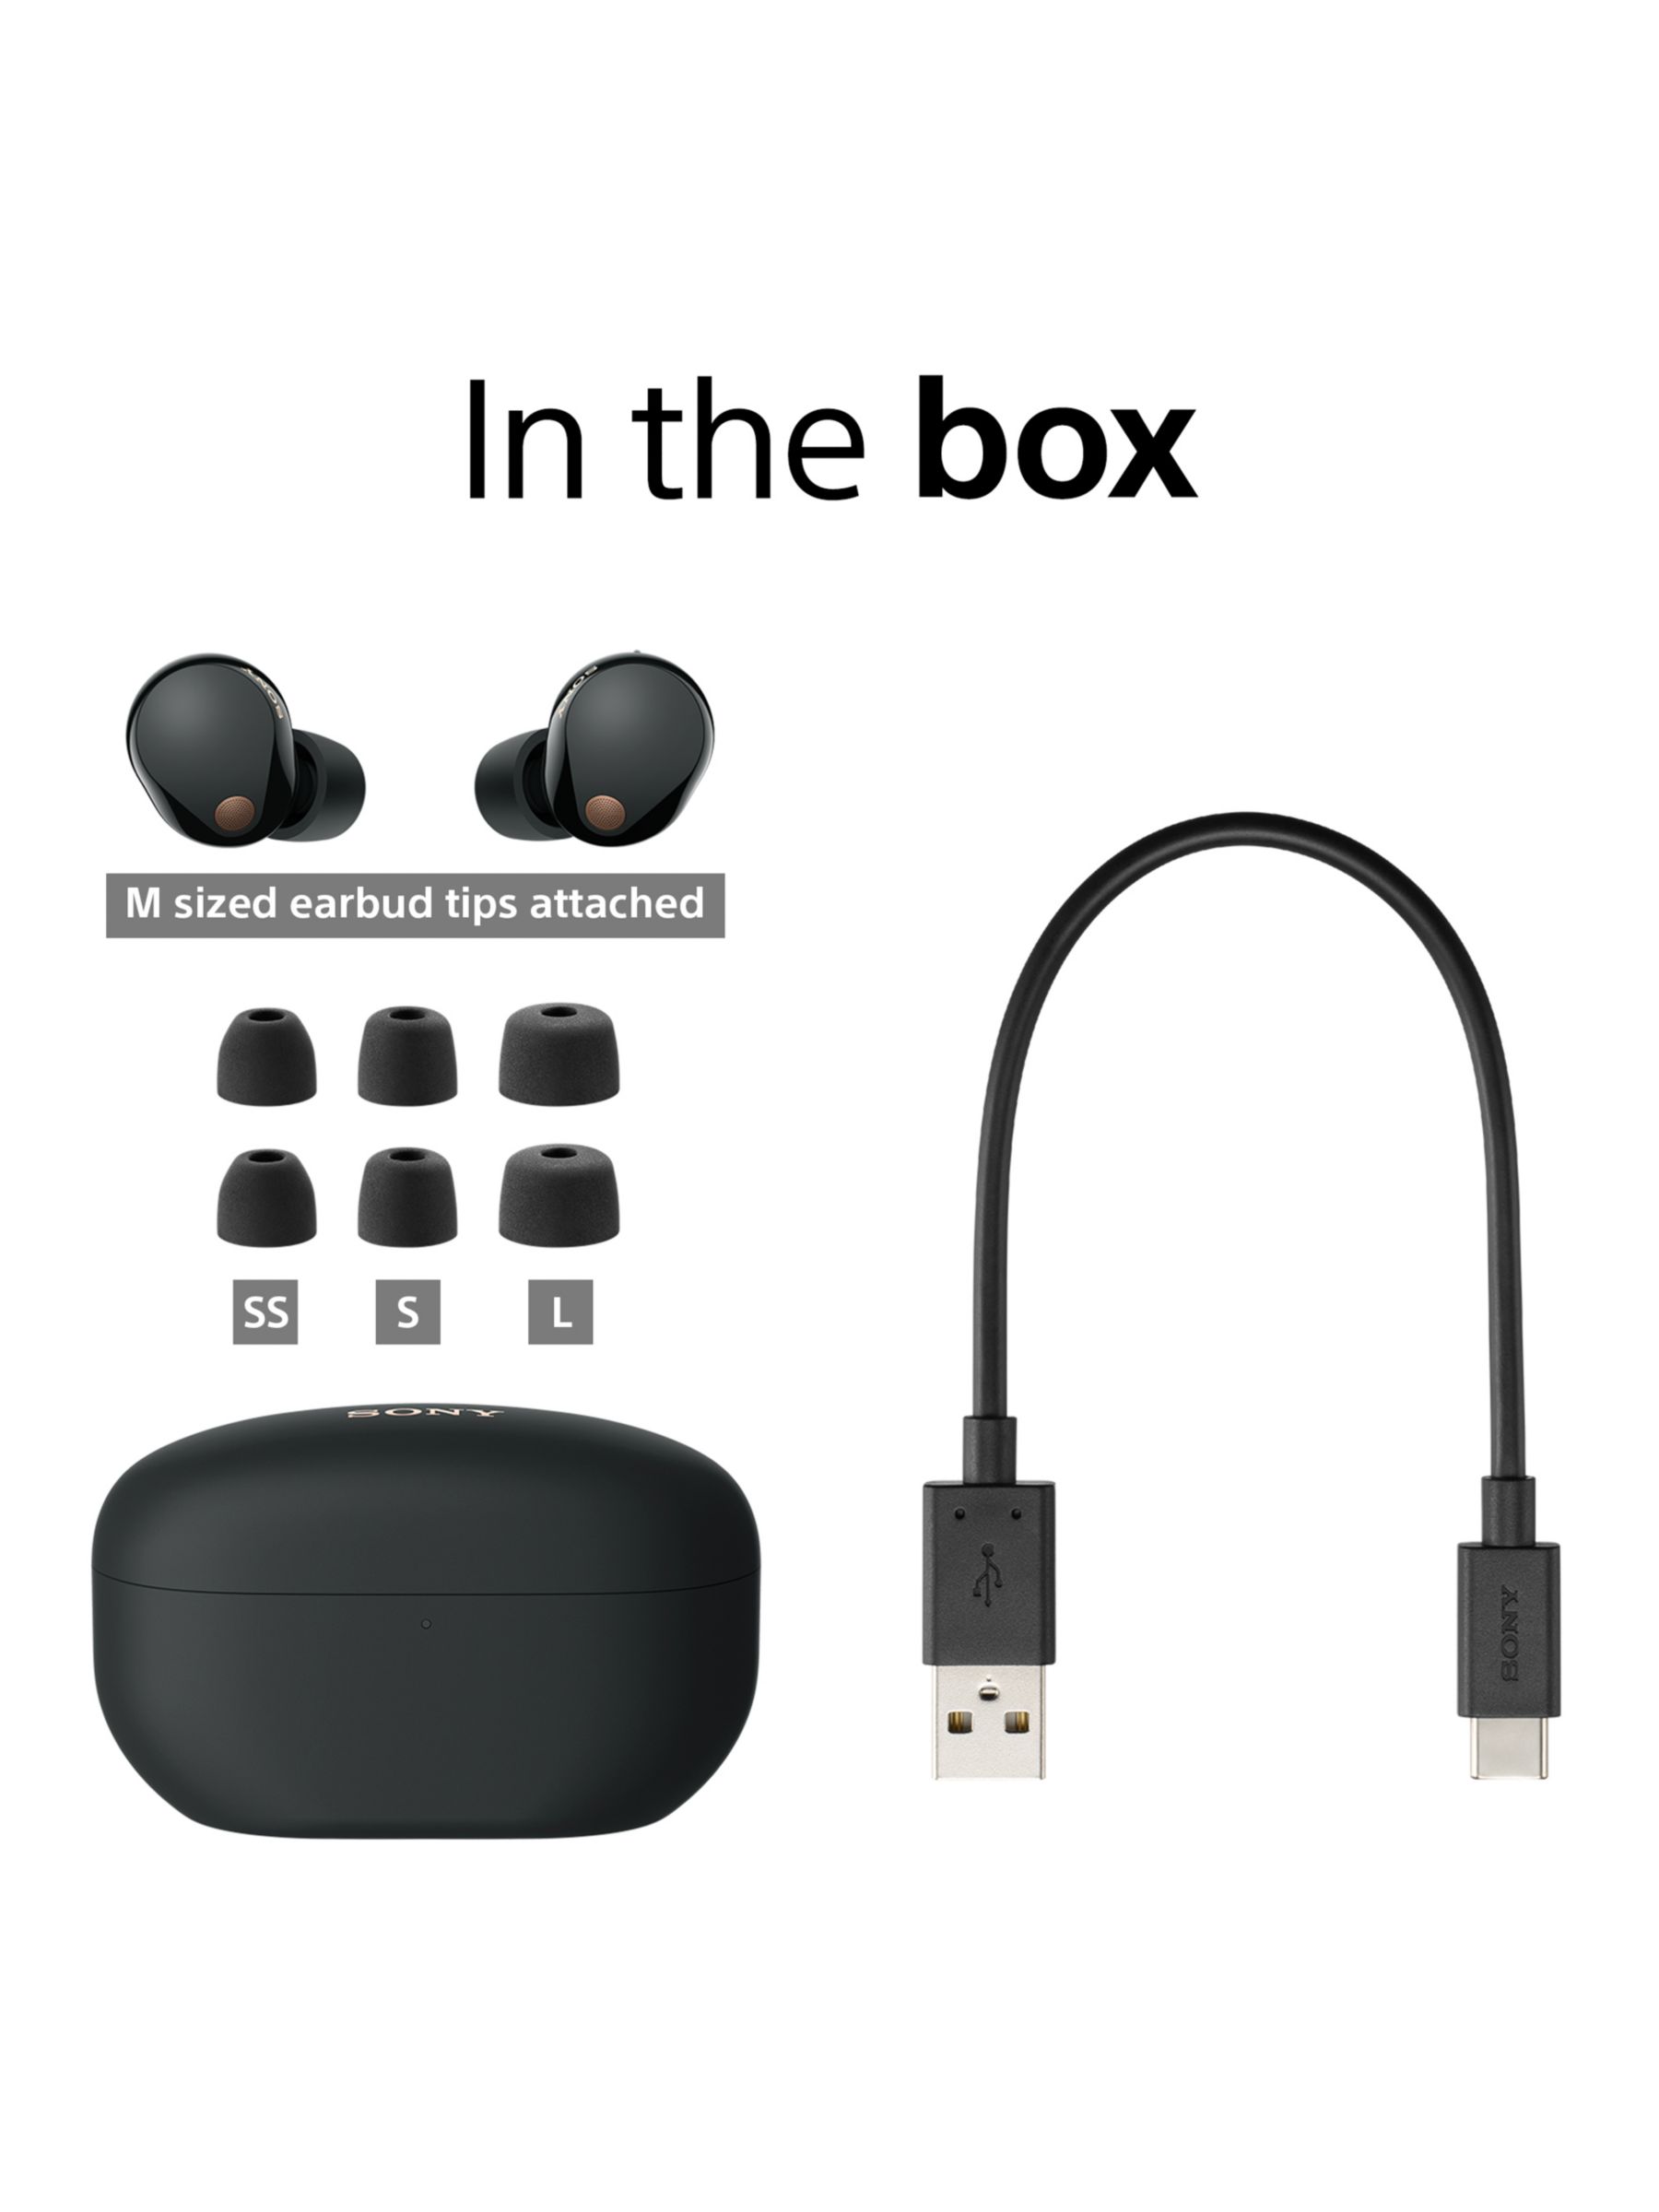  Sony WF-1000XM5 - The Best True Wireless Noise-Canceling  Earbuds with Alexa Built-in, Bluetooth, in-Ear Headphones, Up to 24 Hours  Battery, Quick Charge, IPX4 Rating, Works with iOS & Android - Black 